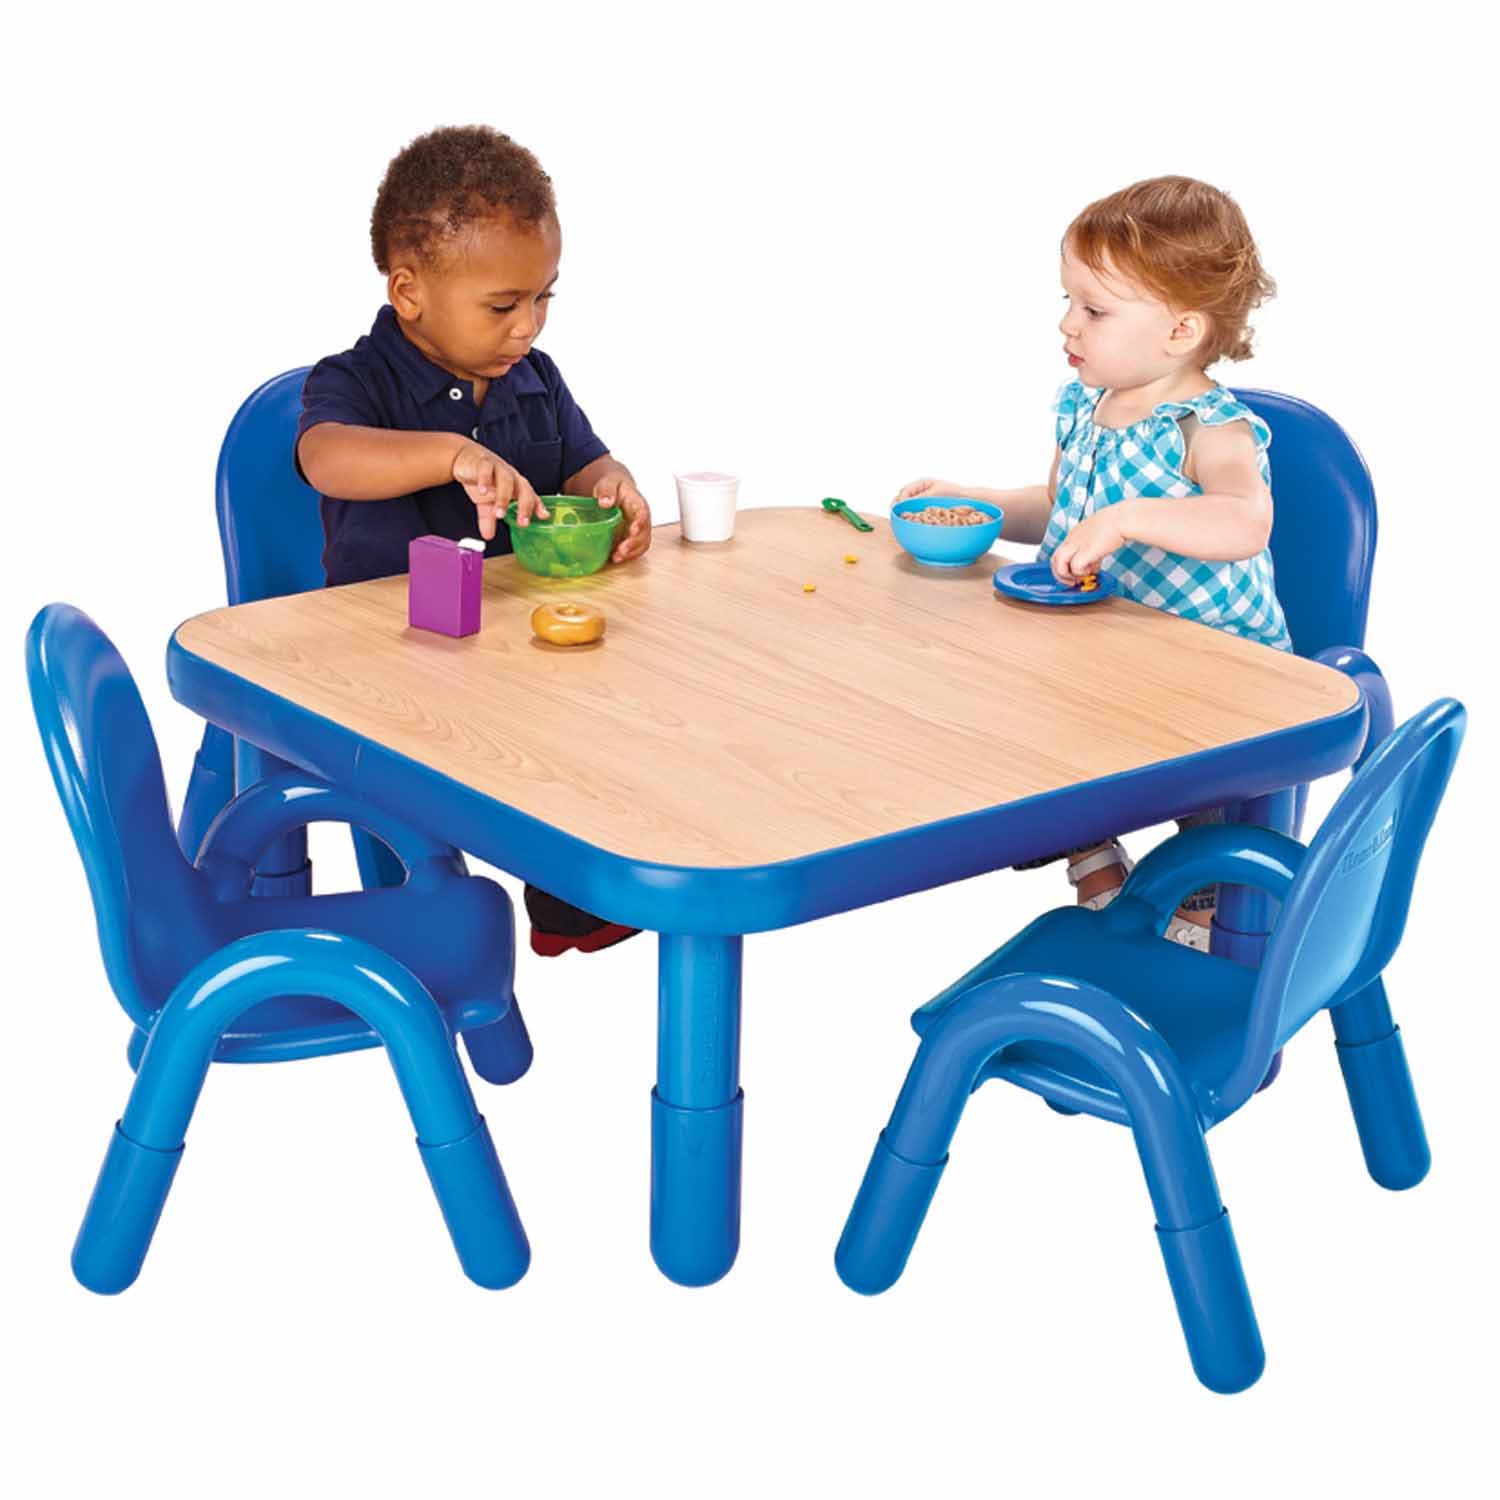 BaseLine® Table (14"H) and Chair (7"H) Set